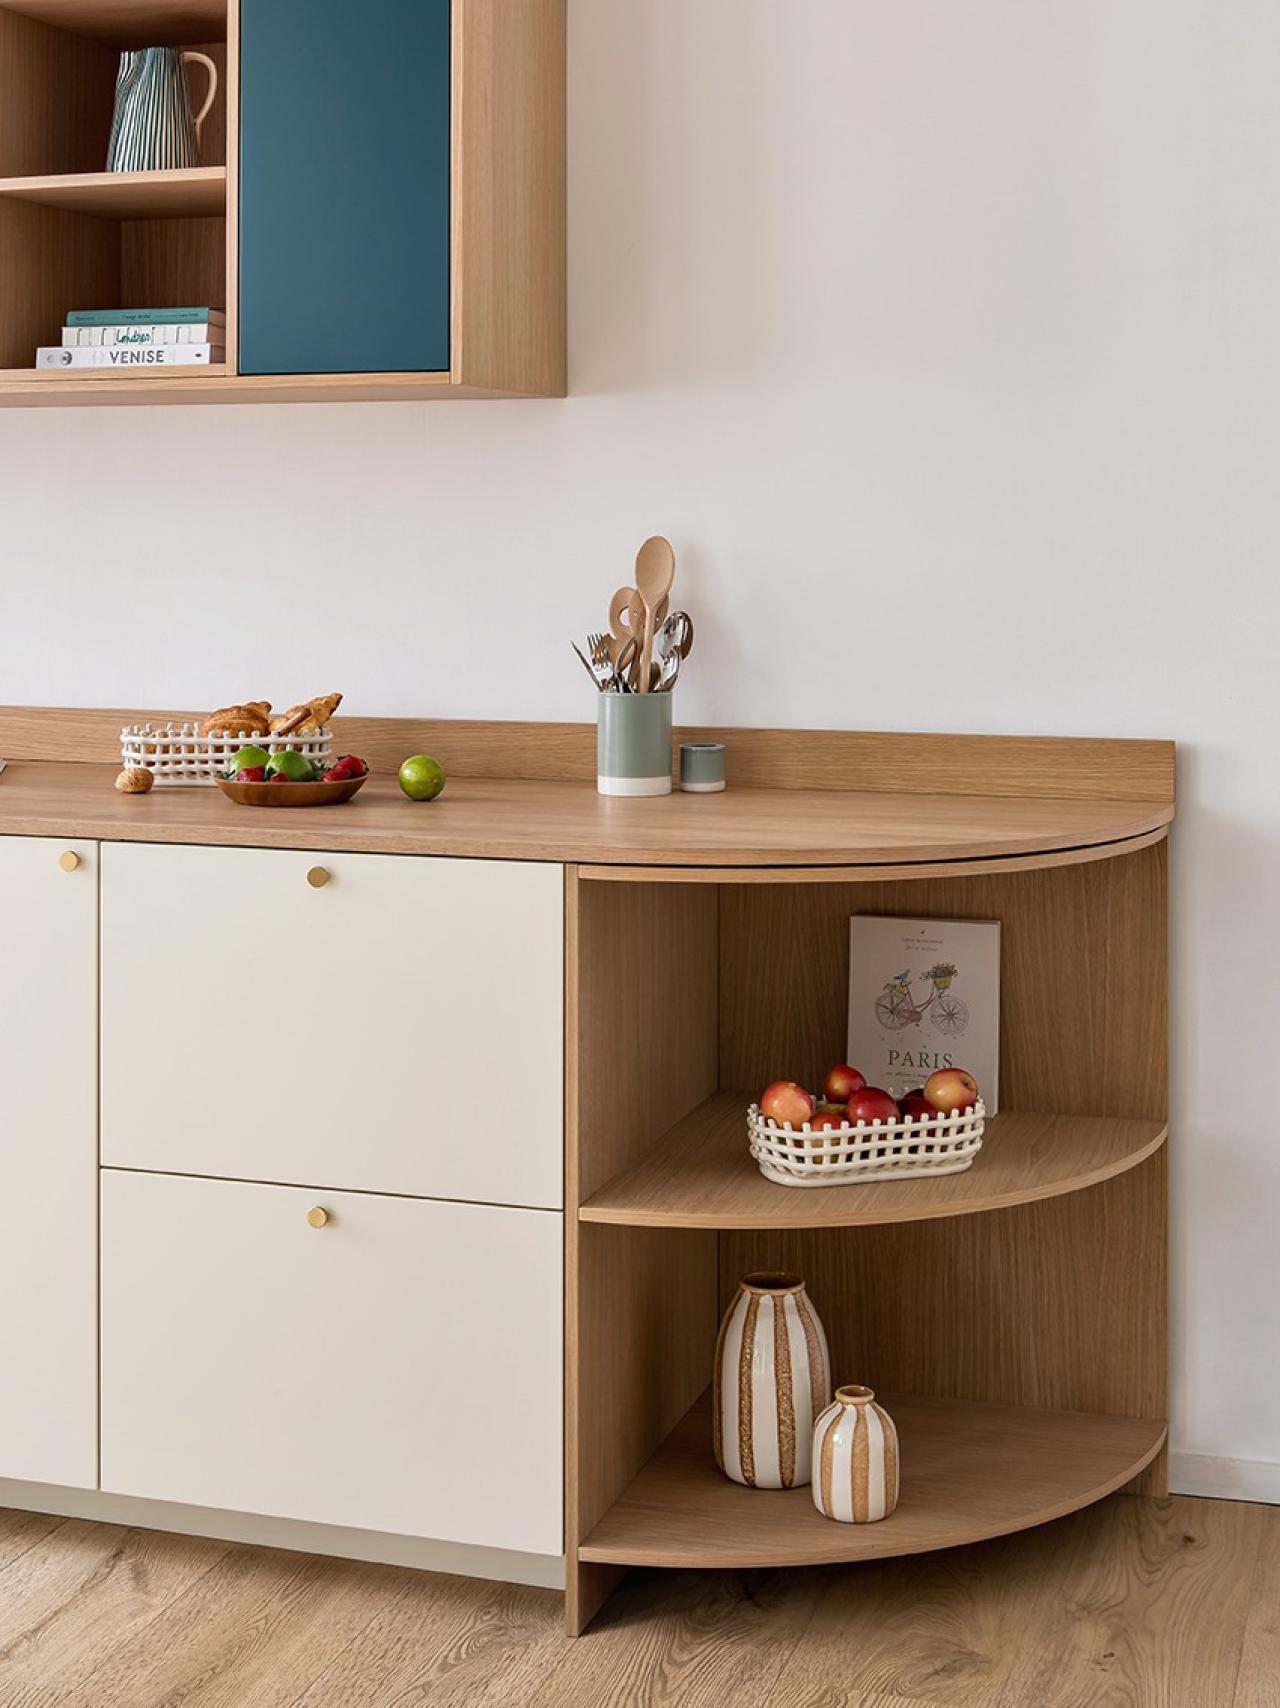 Ivoire and Vert sauvage kitchen, with curved open cabinets